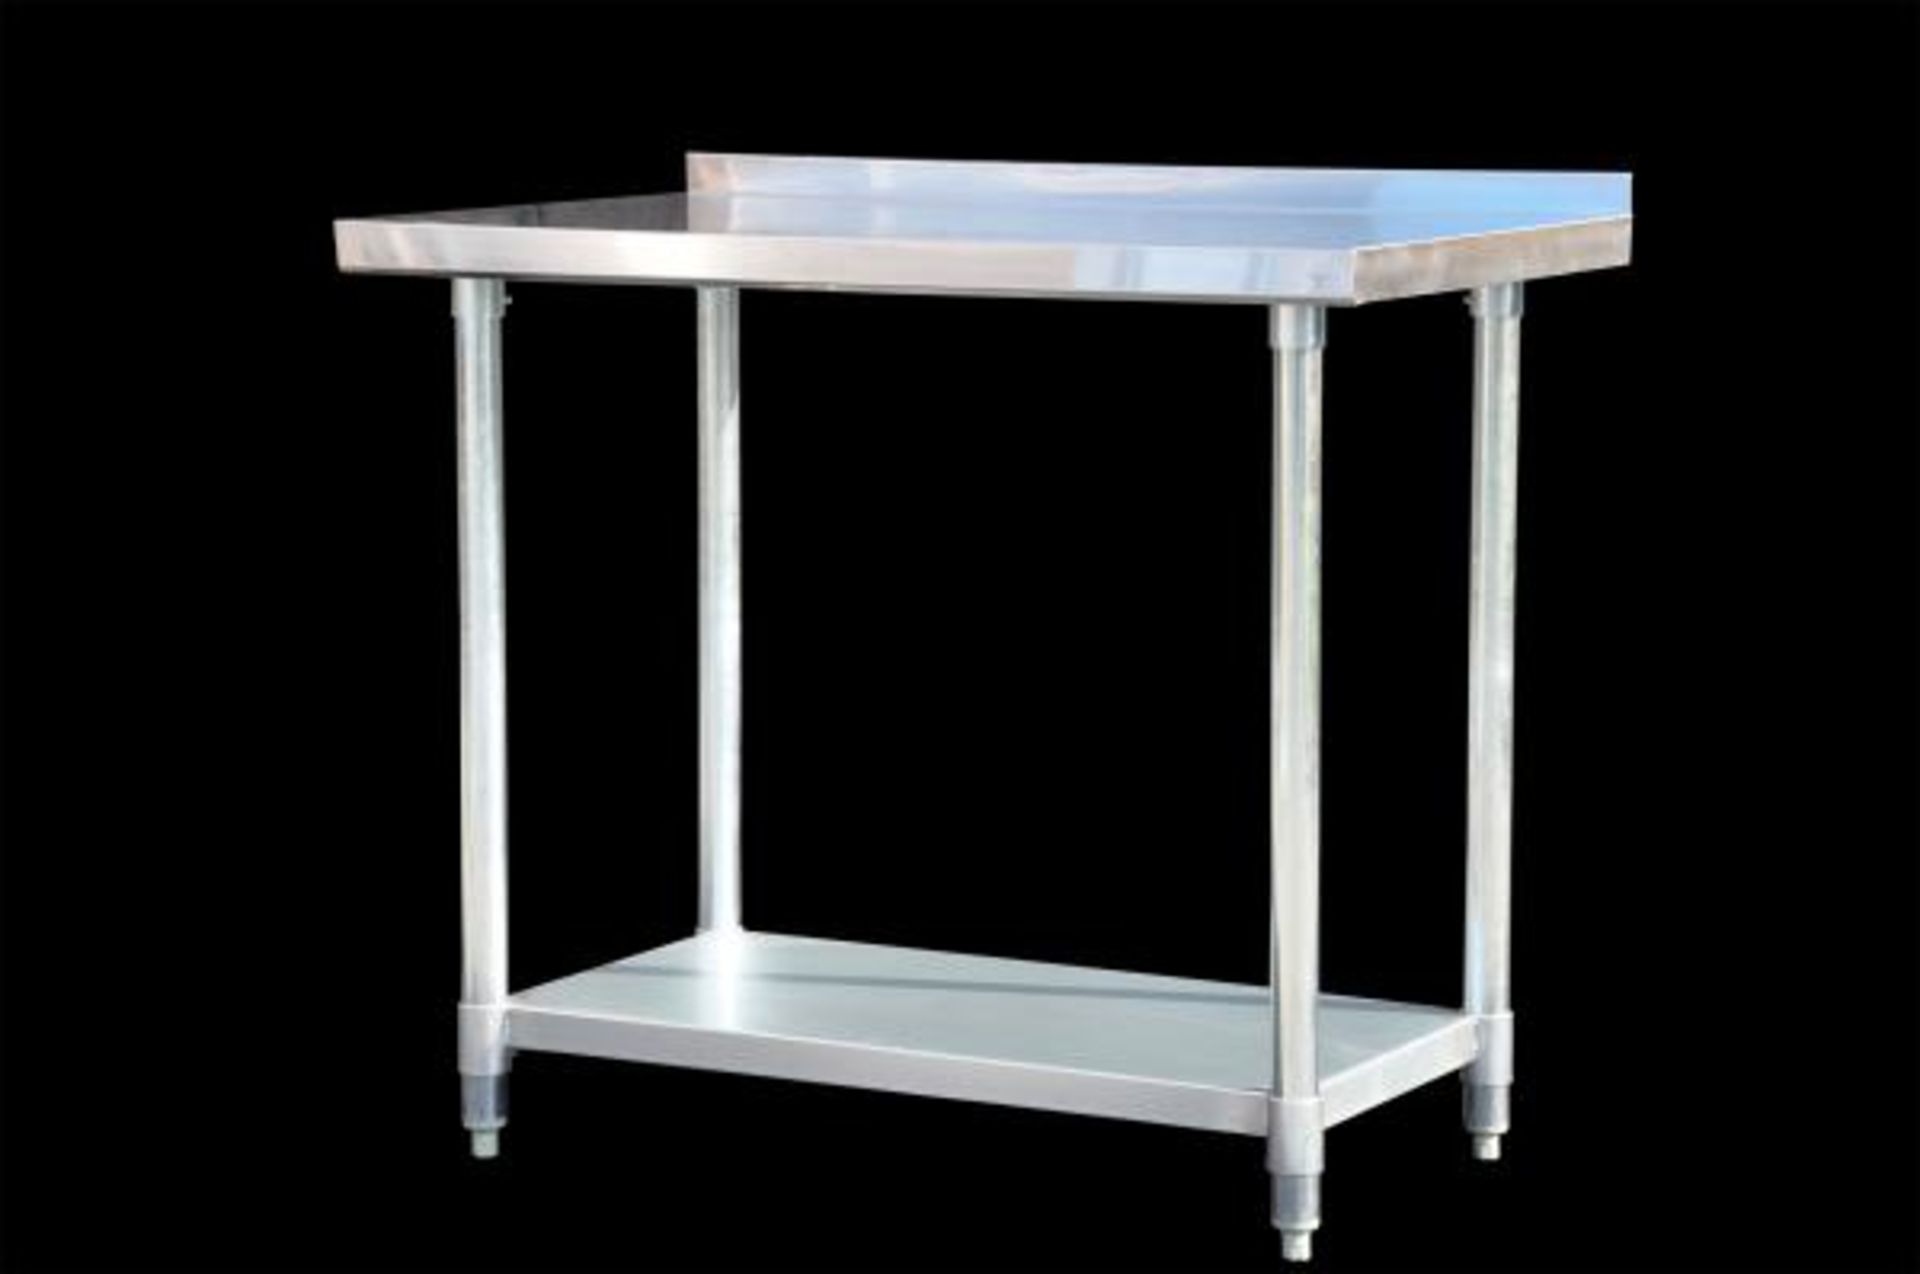 Stainless steel worktable with back splash. adjustable nylon feet, flat pack, superb quality 600 x